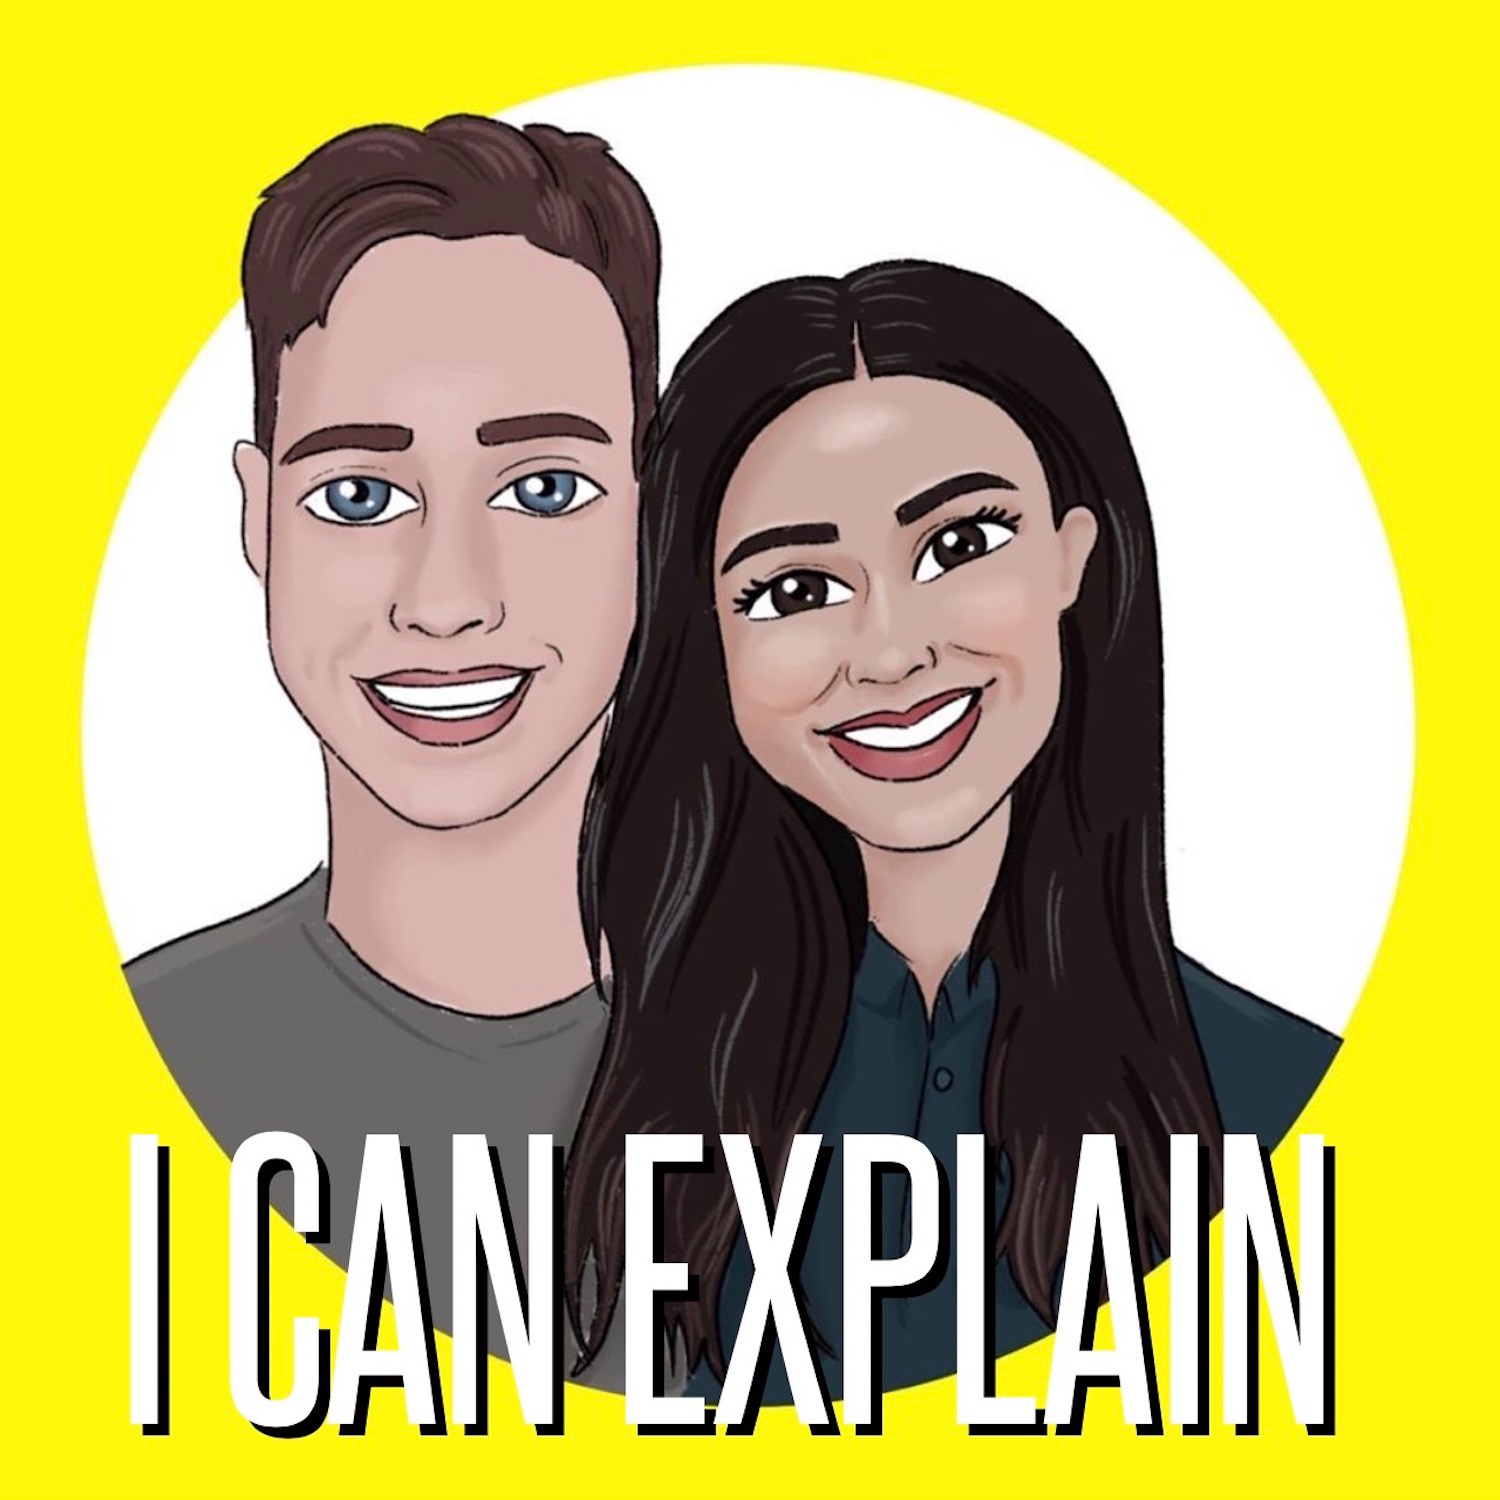 Being Gay Is Fun | I Can Explain Podcast EP.168